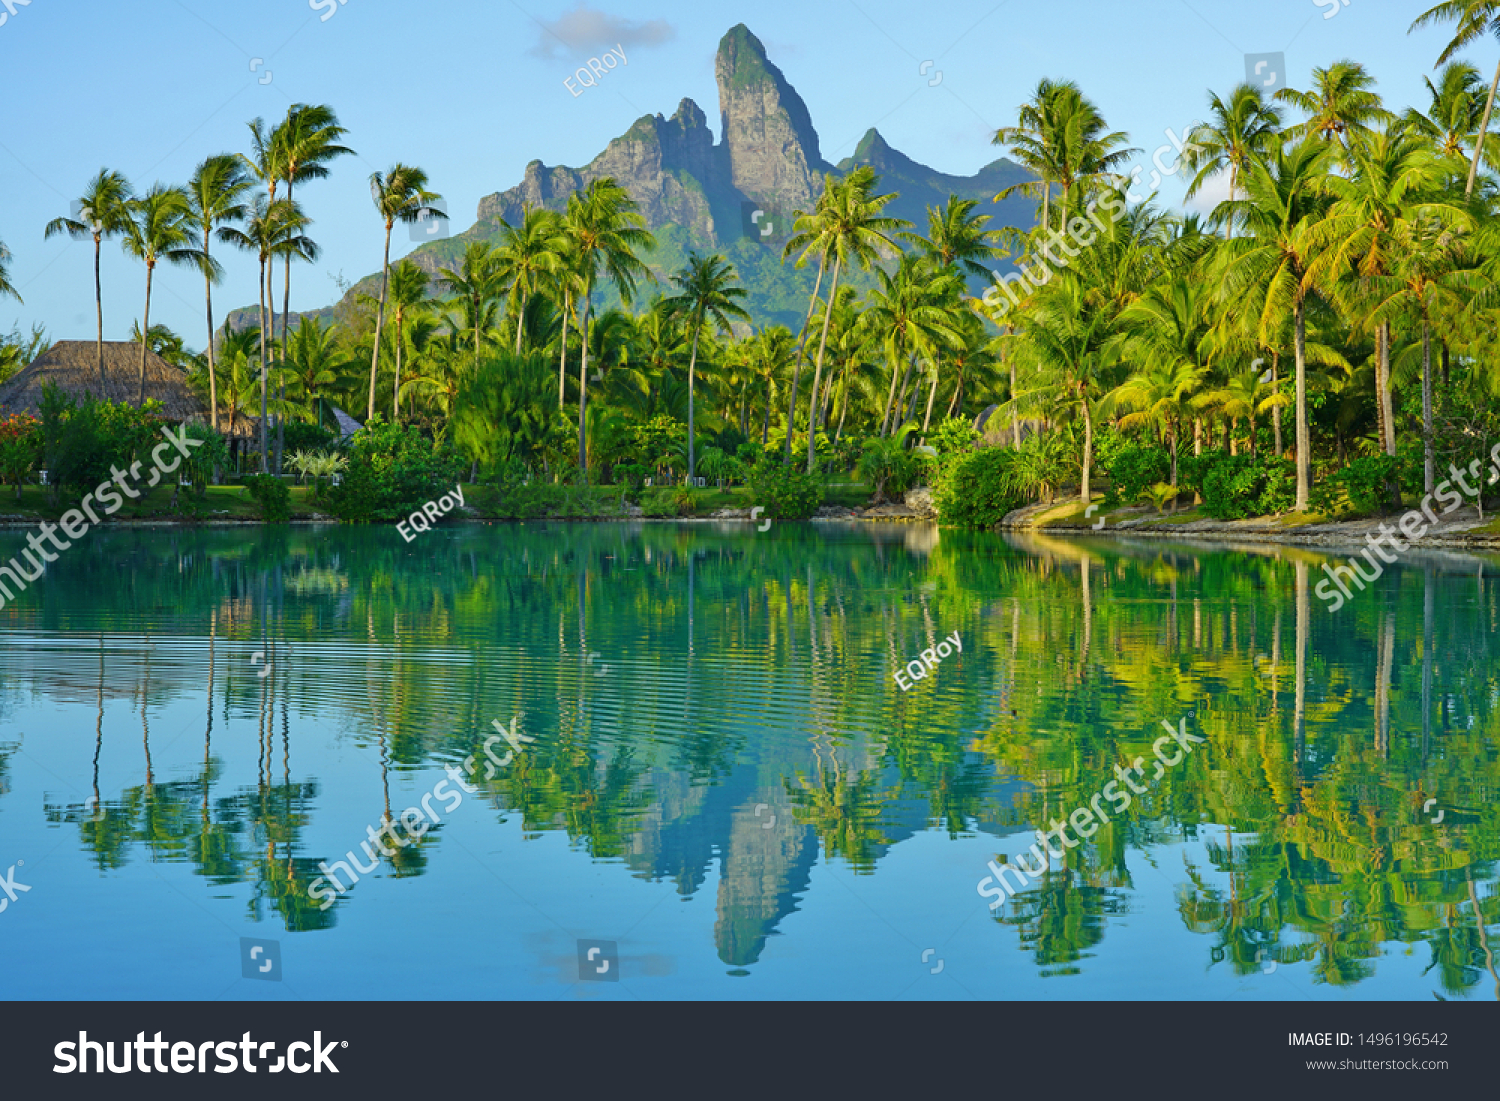 View of the Mont Otemanu mountain reflecting in water at sunset in Bora Bora, French Polynesia, South Pacific #1496196542